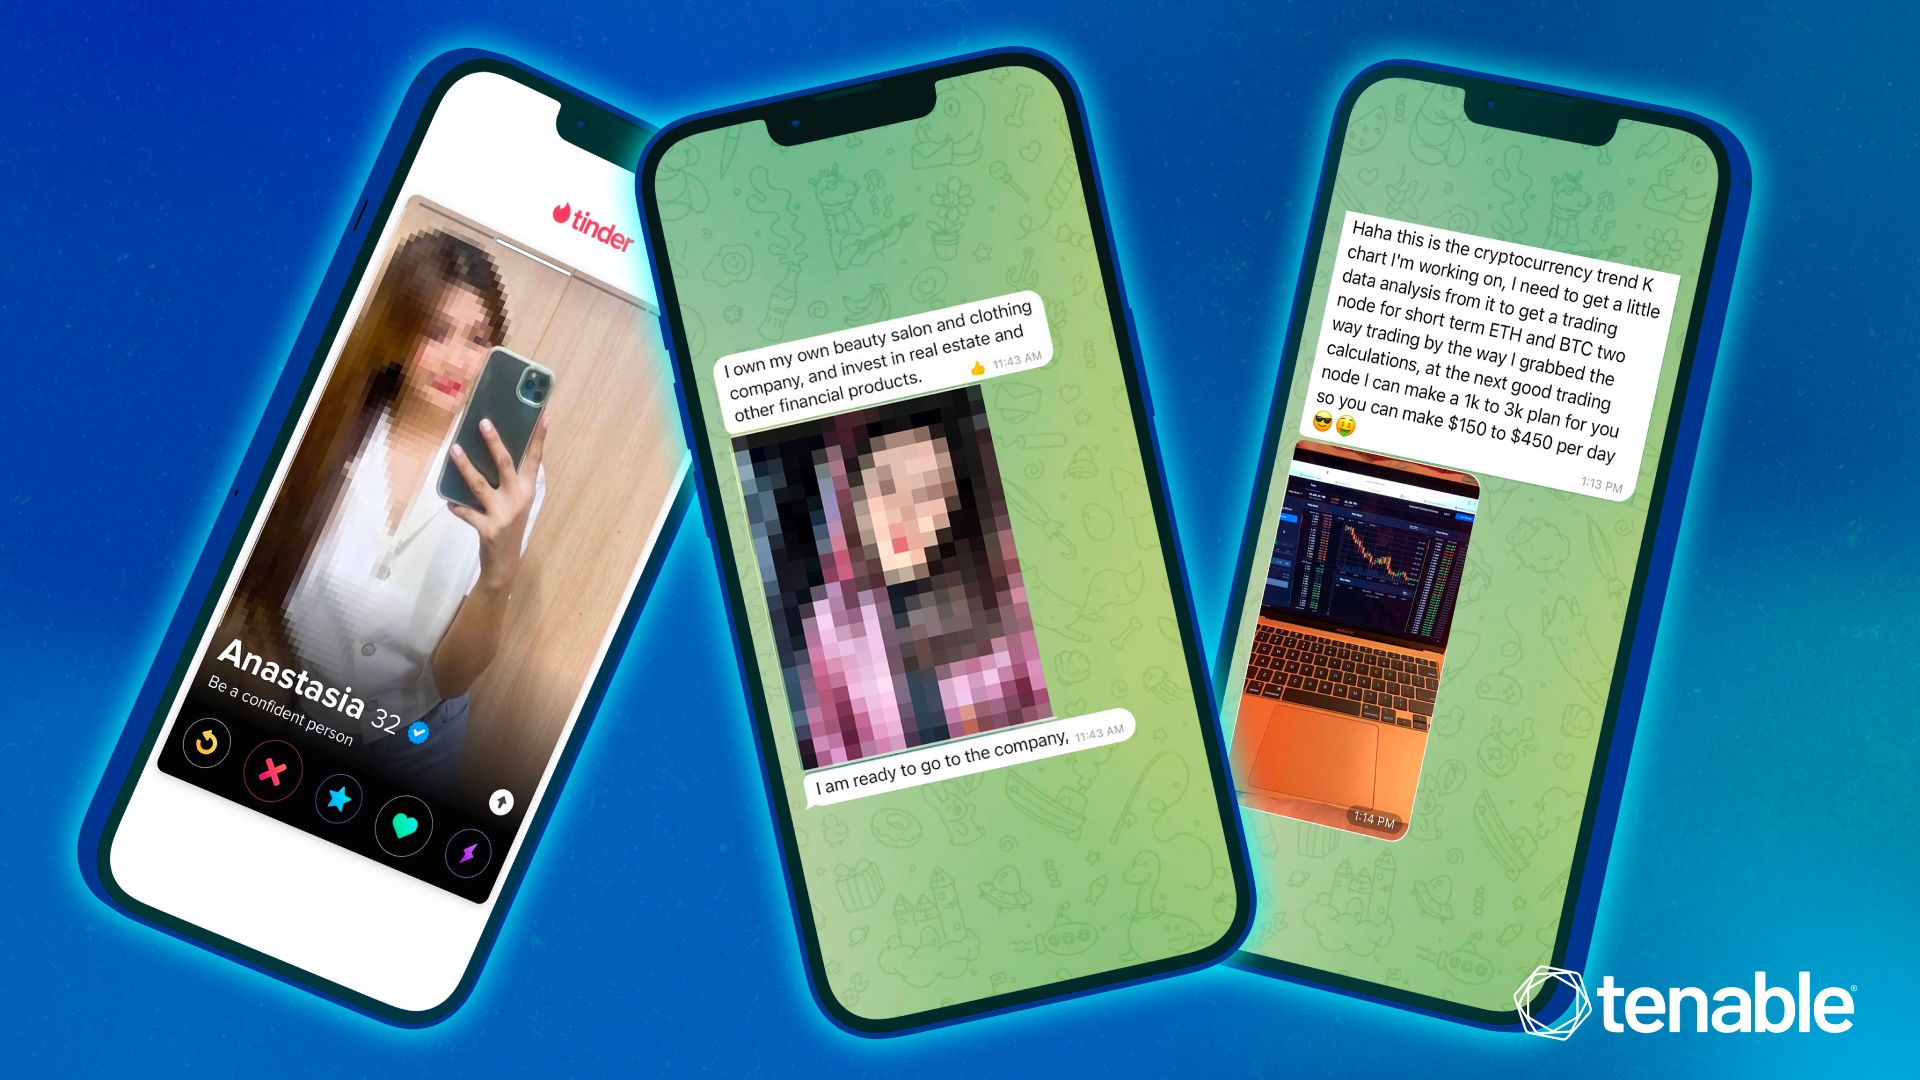 Three phone screens featuring images of scammers on Tinder and WhatsApp that are conducting a pig butchering scam, promoting fake investments into cryptocurrency.